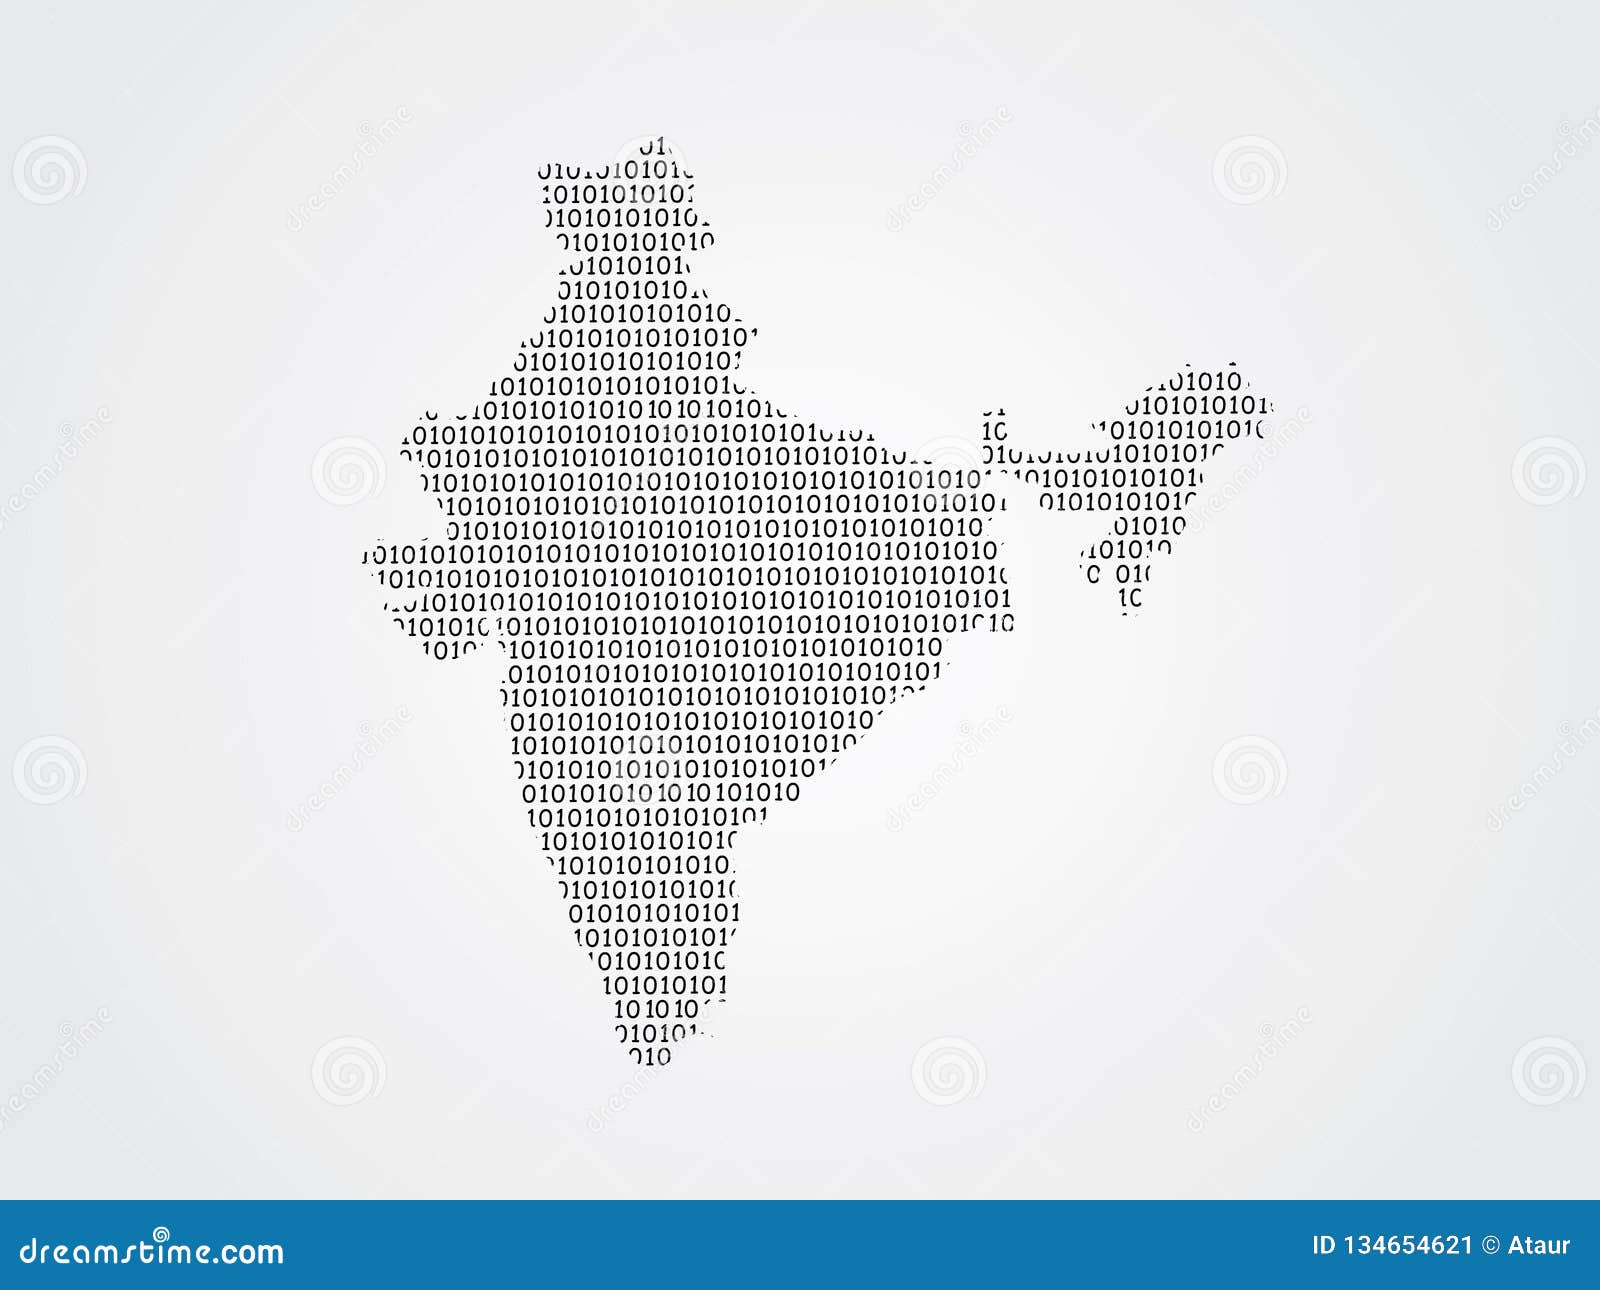 India Vector Map Illustration Using Binary Codes on White Background To  Mean Advancement of Digital Technology Stock Vector - Illustration of  binary, global: 134654621